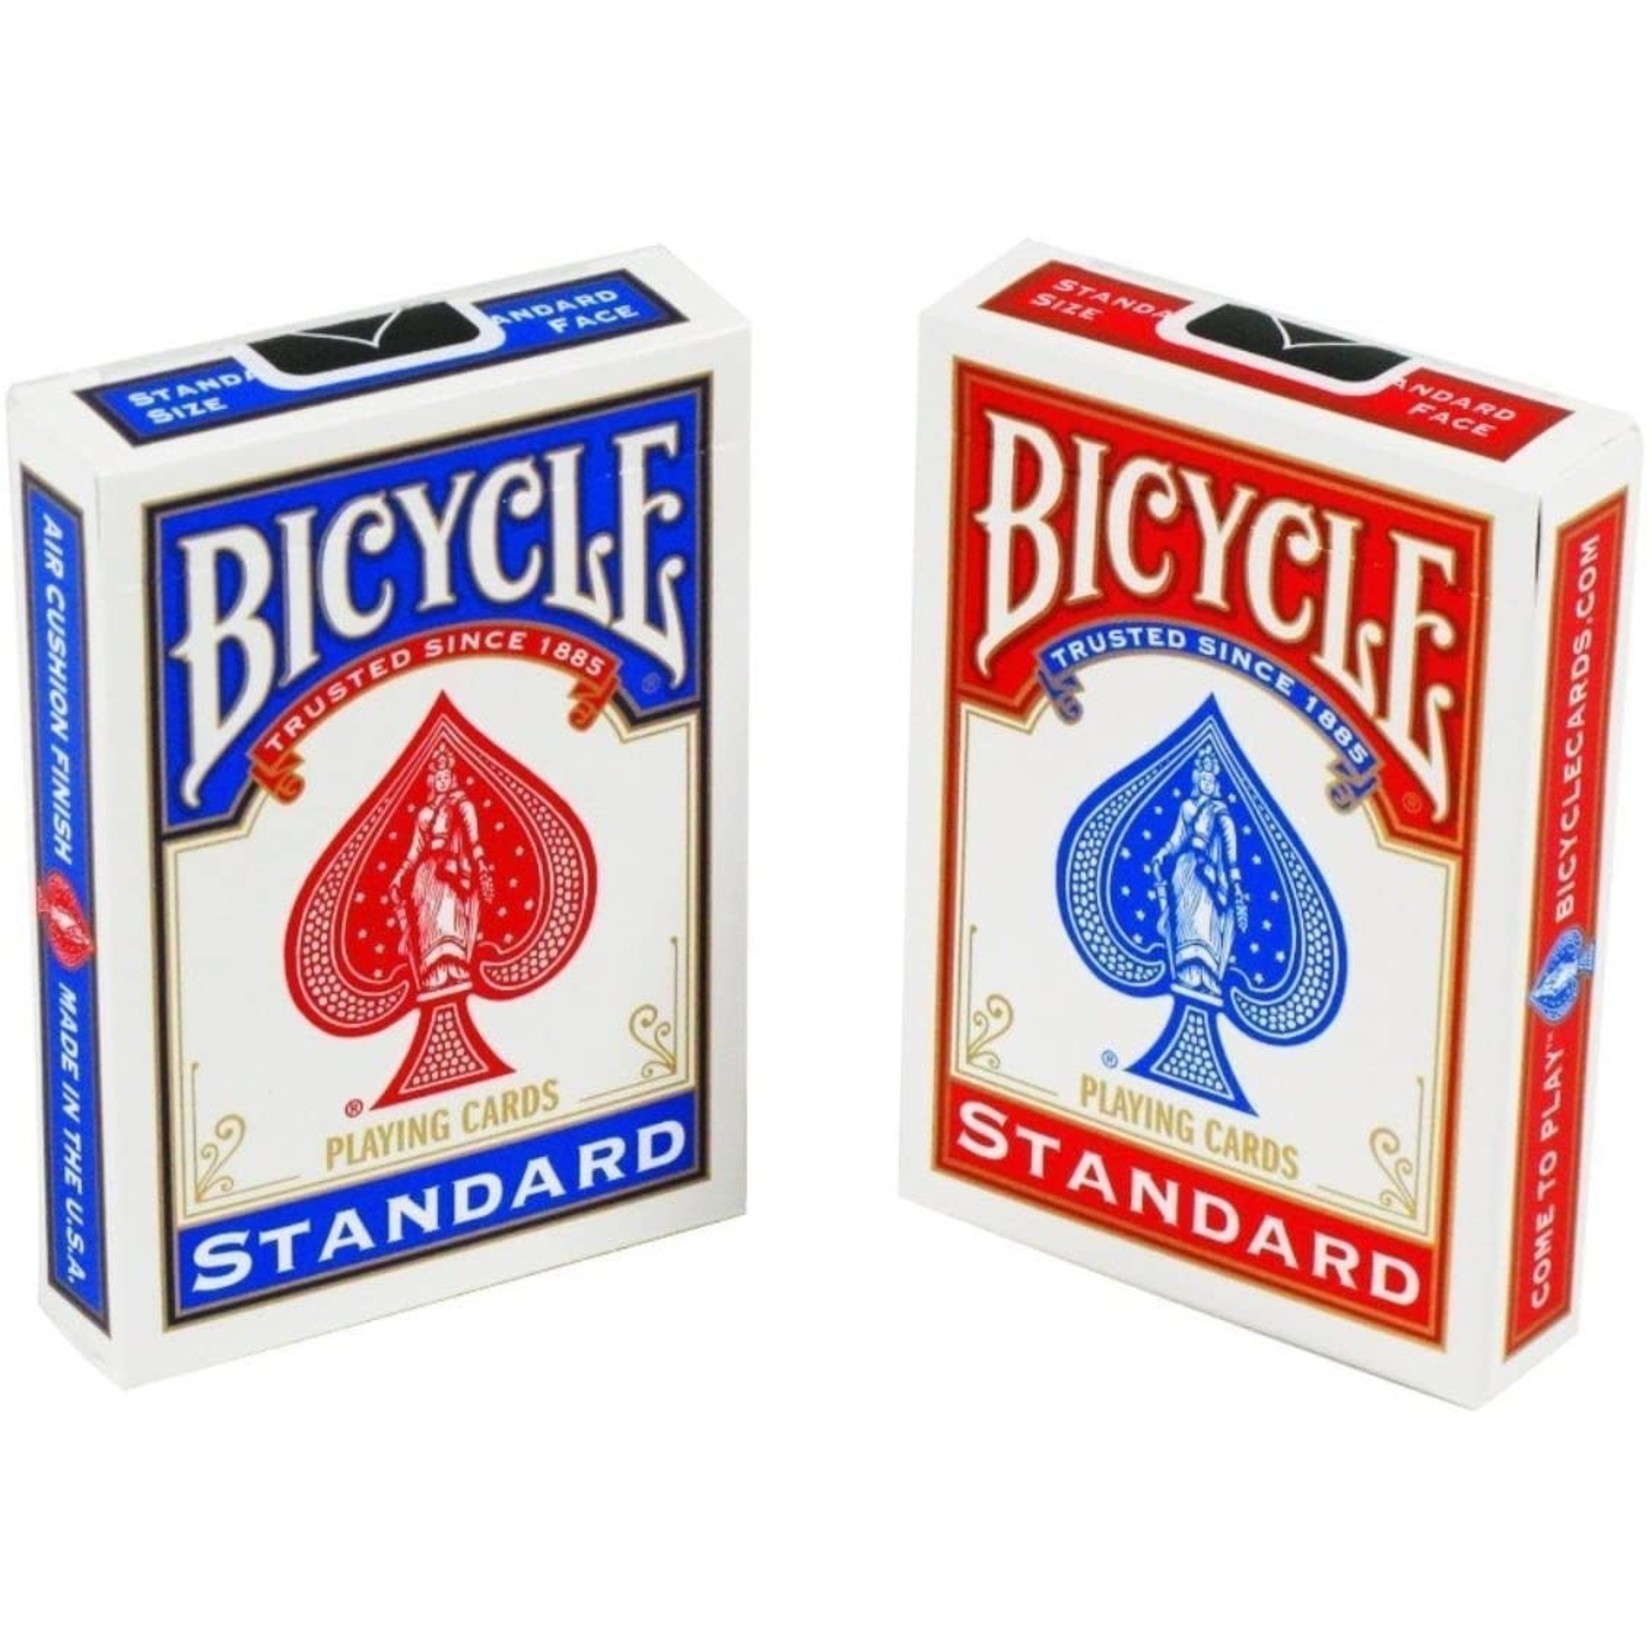 Bicycle Bicycle Playing Cards Standard Deck